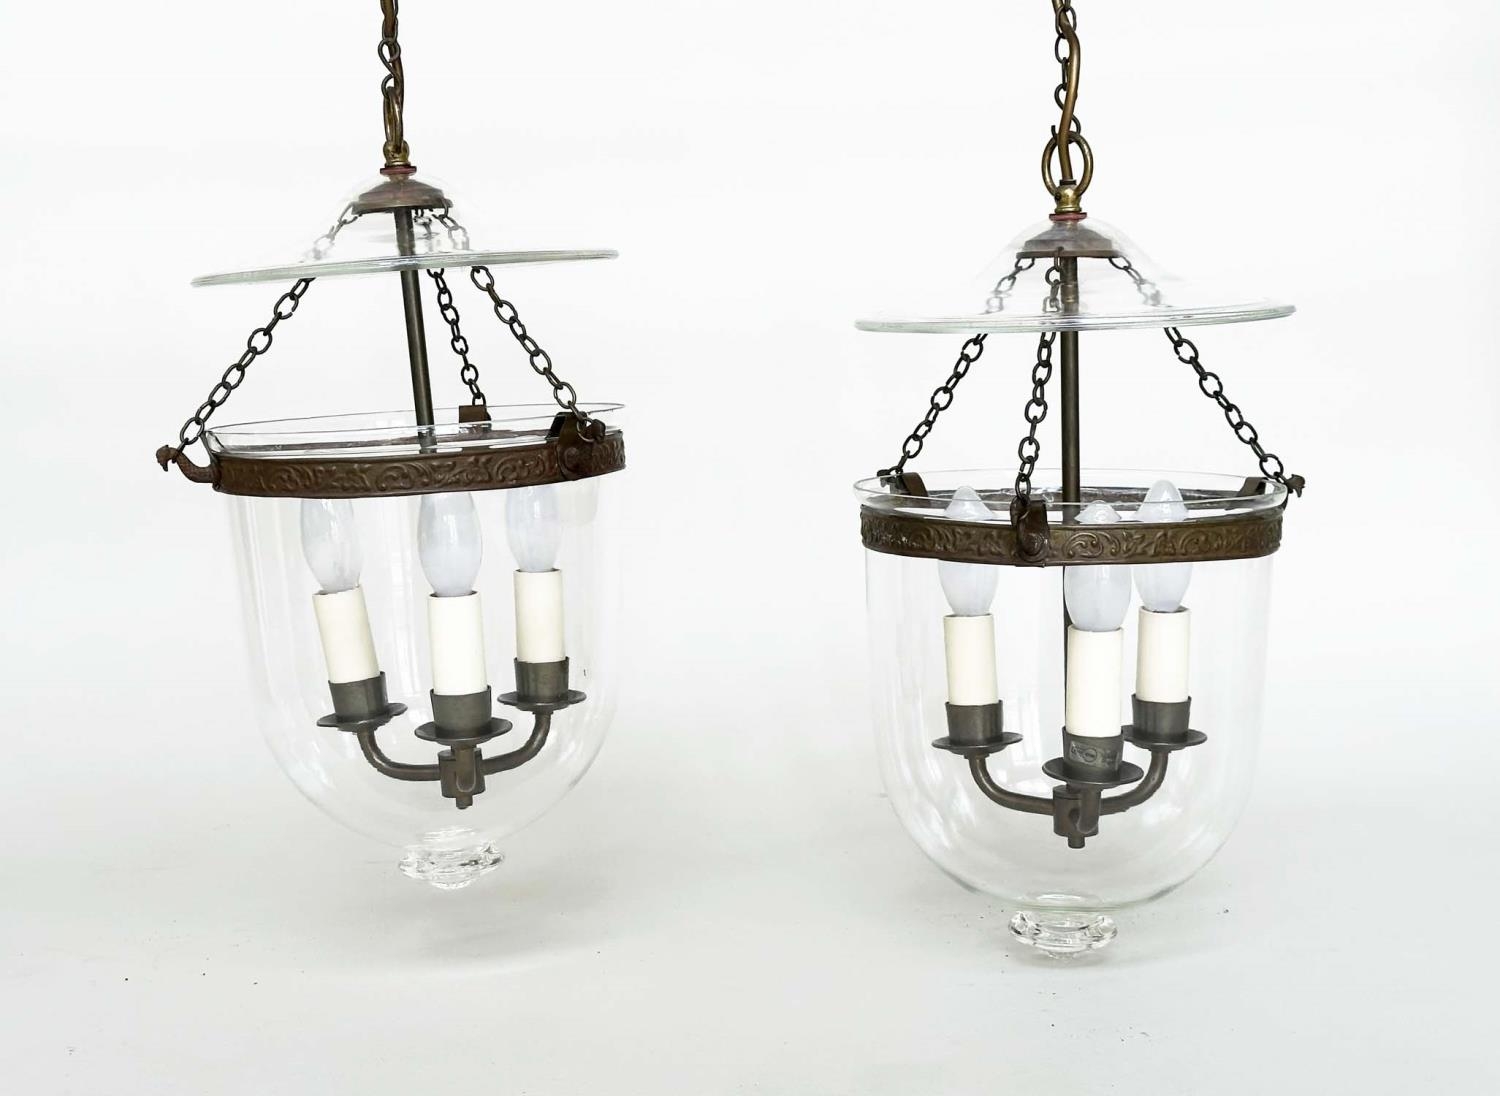 HALL LANTERNS, a pair, glass and bronzed metal each with three lights, 40cm H x 23cm. (2)